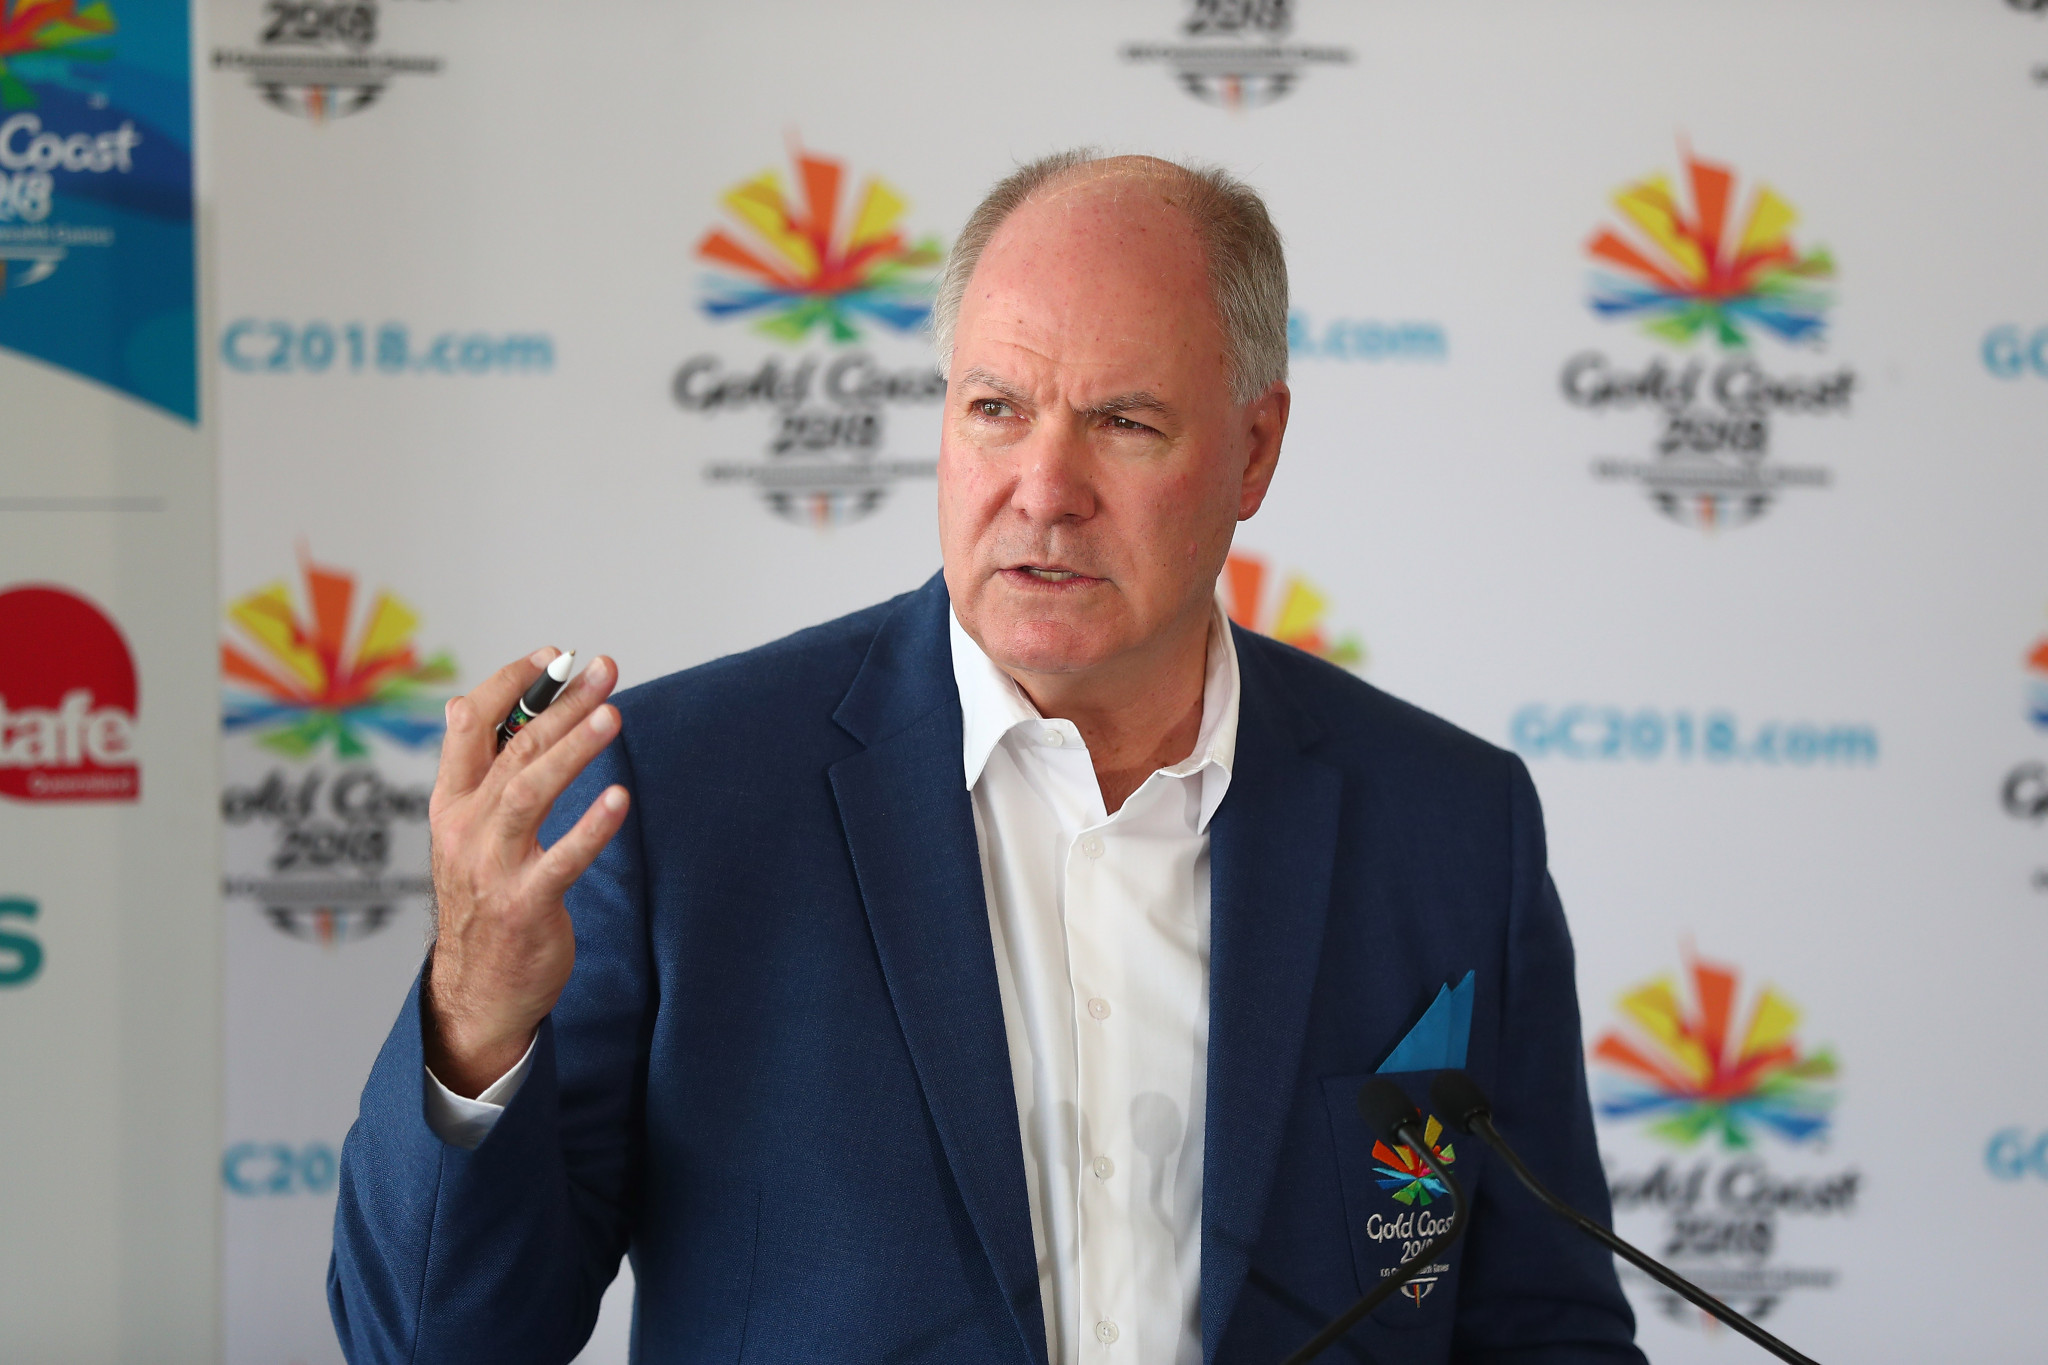 Gold Coast 2018 chief executive Mark Peters says police will not be heavy-handed when handing out fines ©Getty Images